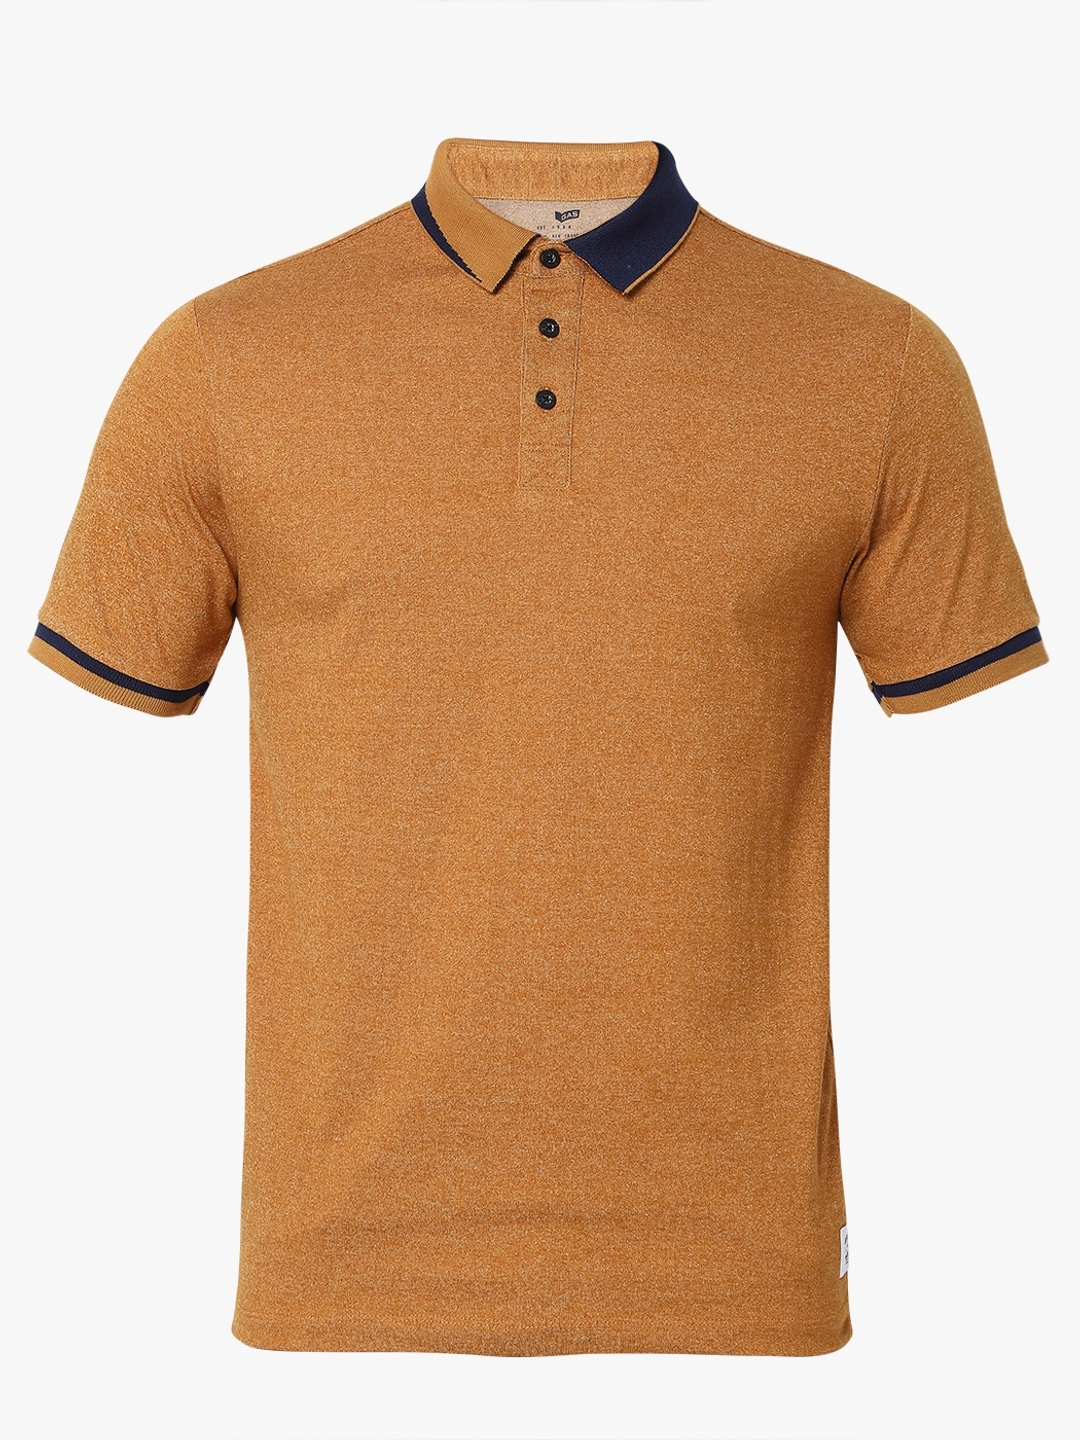 Duo Tone Slim Fit Polo T-Shirt